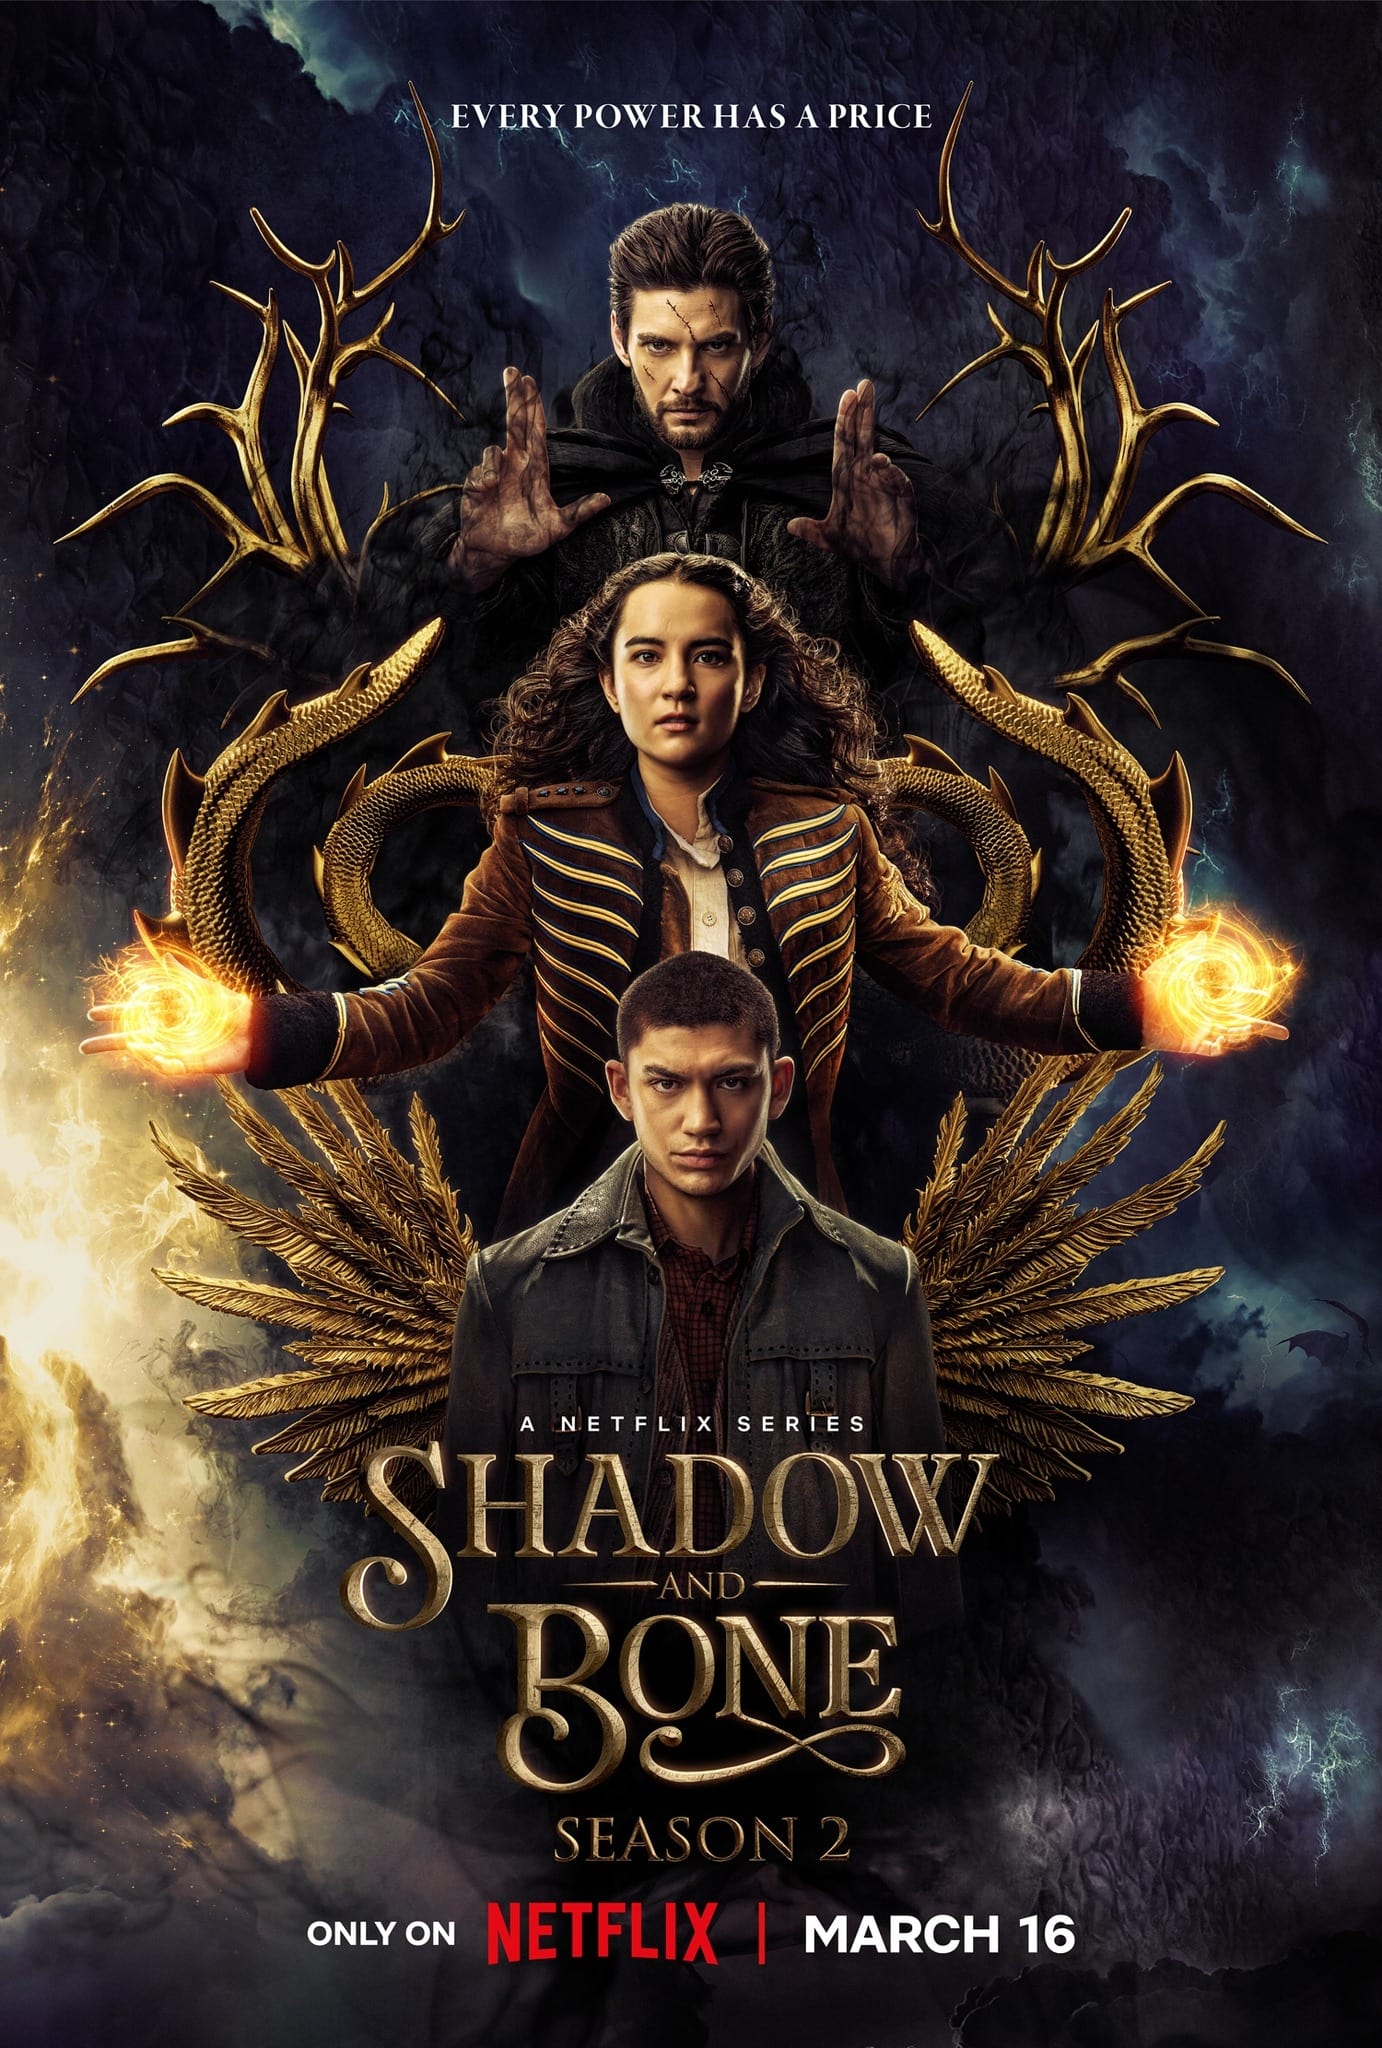 First trailer for new episodes of “Shadow and Bone”: Following “The Witcher” setback, Netflix is placing its confidence in this series